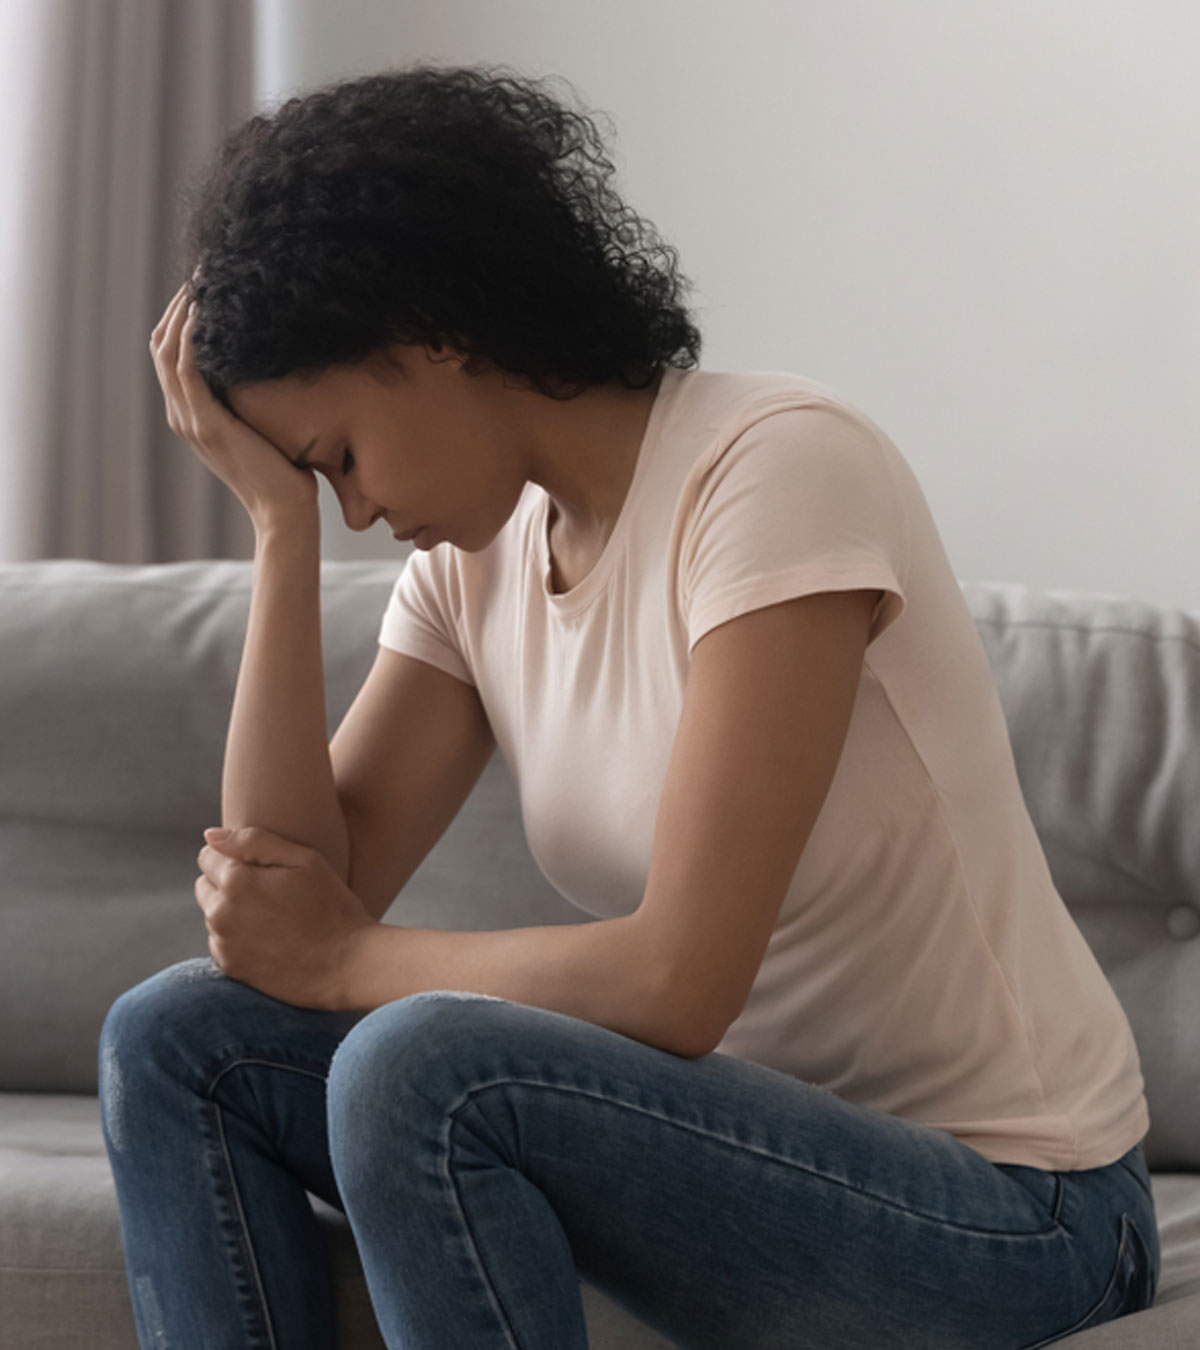 Threatened Miscarriage: Causes, Symptoms And Risk Factors